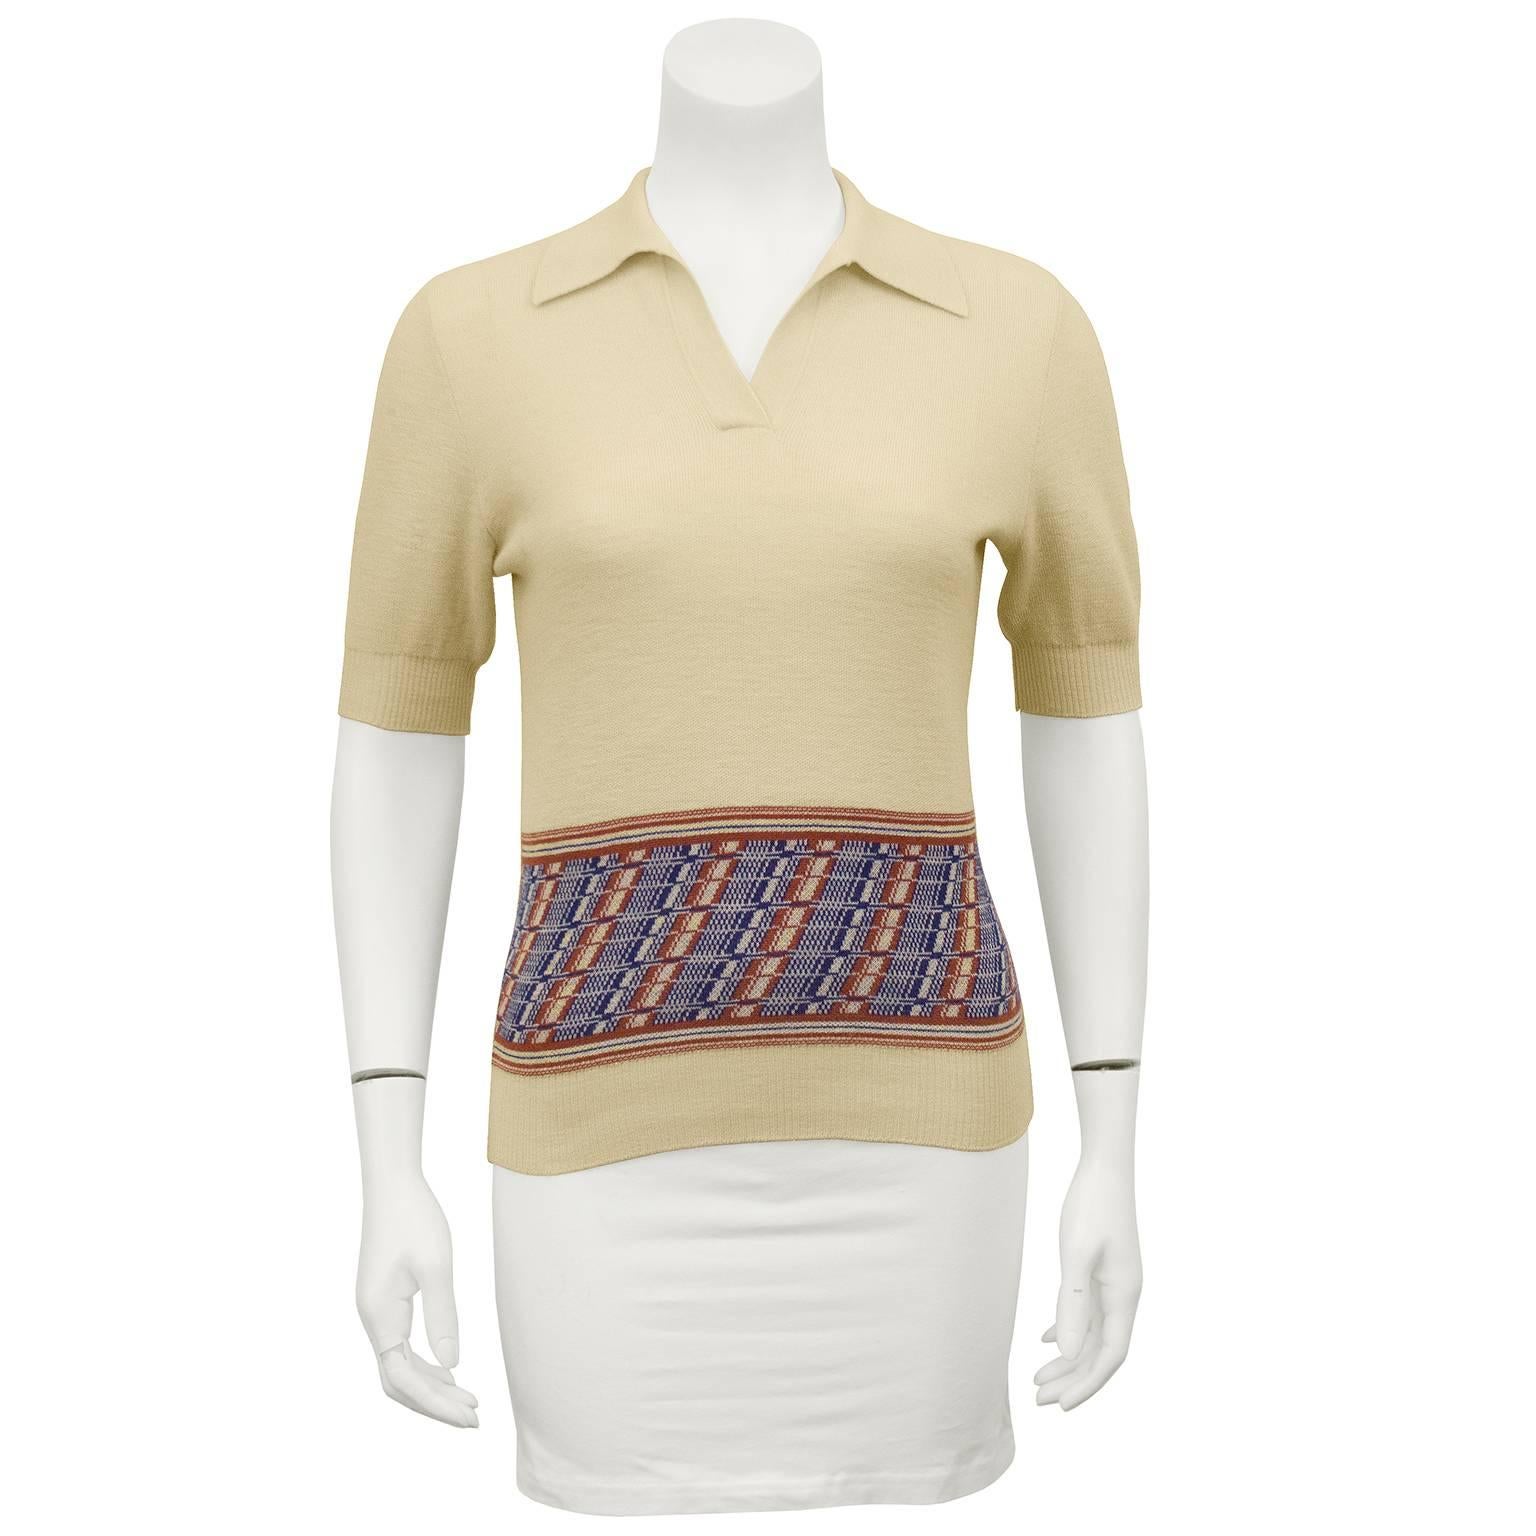 Super cute 1960s Gucci wool knit polo. Cream with blue and rust pattern at hips. Open collar with no buttons. Ribbing at sleeves and hem. Excellent vintage condition. Fits like a US 2-4. 

Sleeve 10" Shoulder 18" Bust 33" Waist